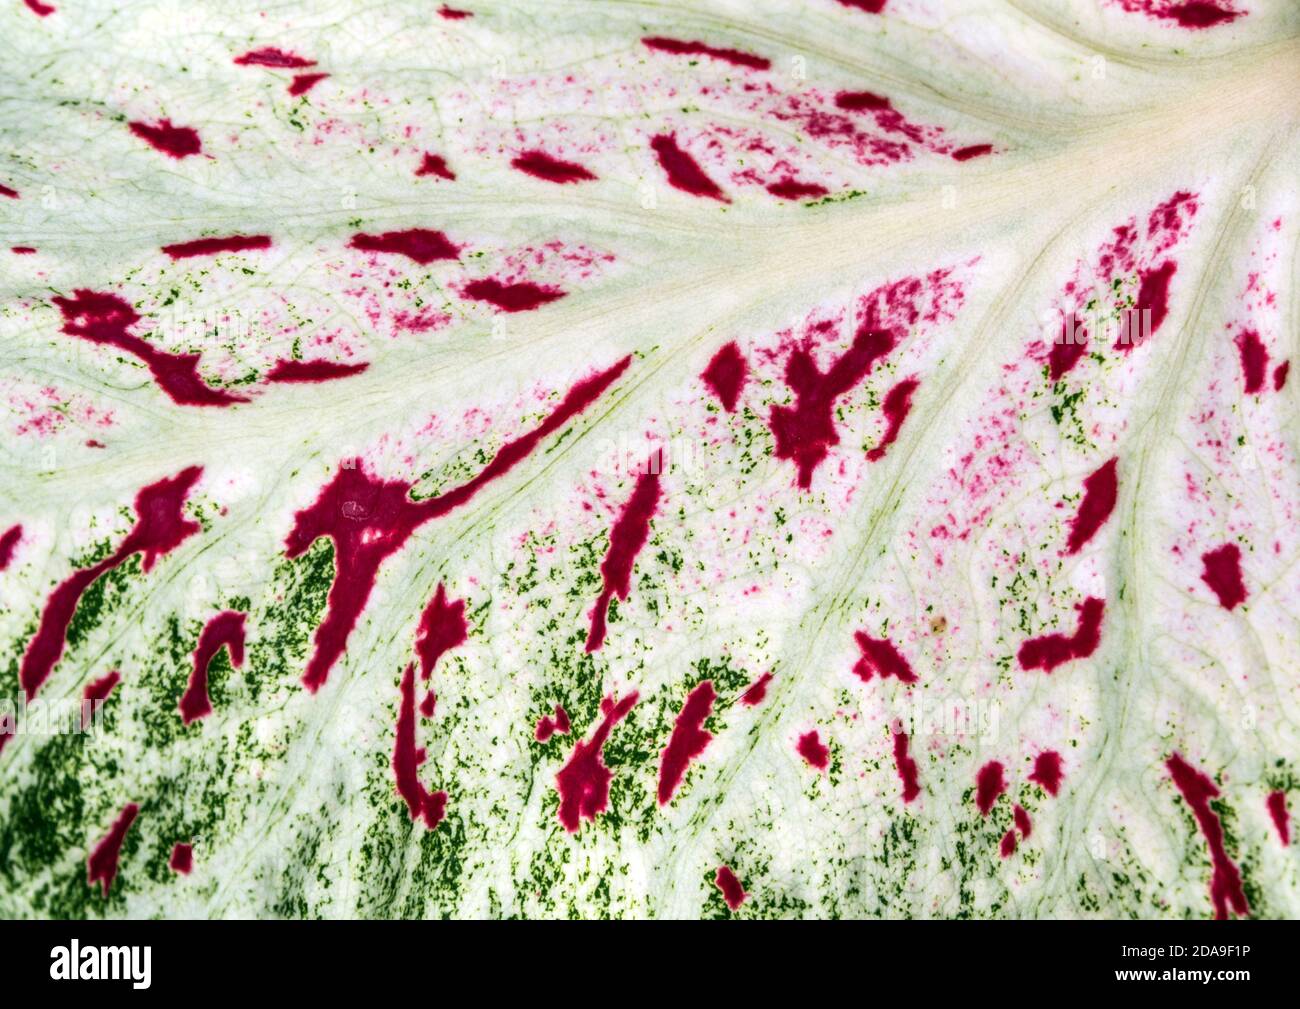 Red and green freckles on a White leaf of Caladium leaf Stock Photo